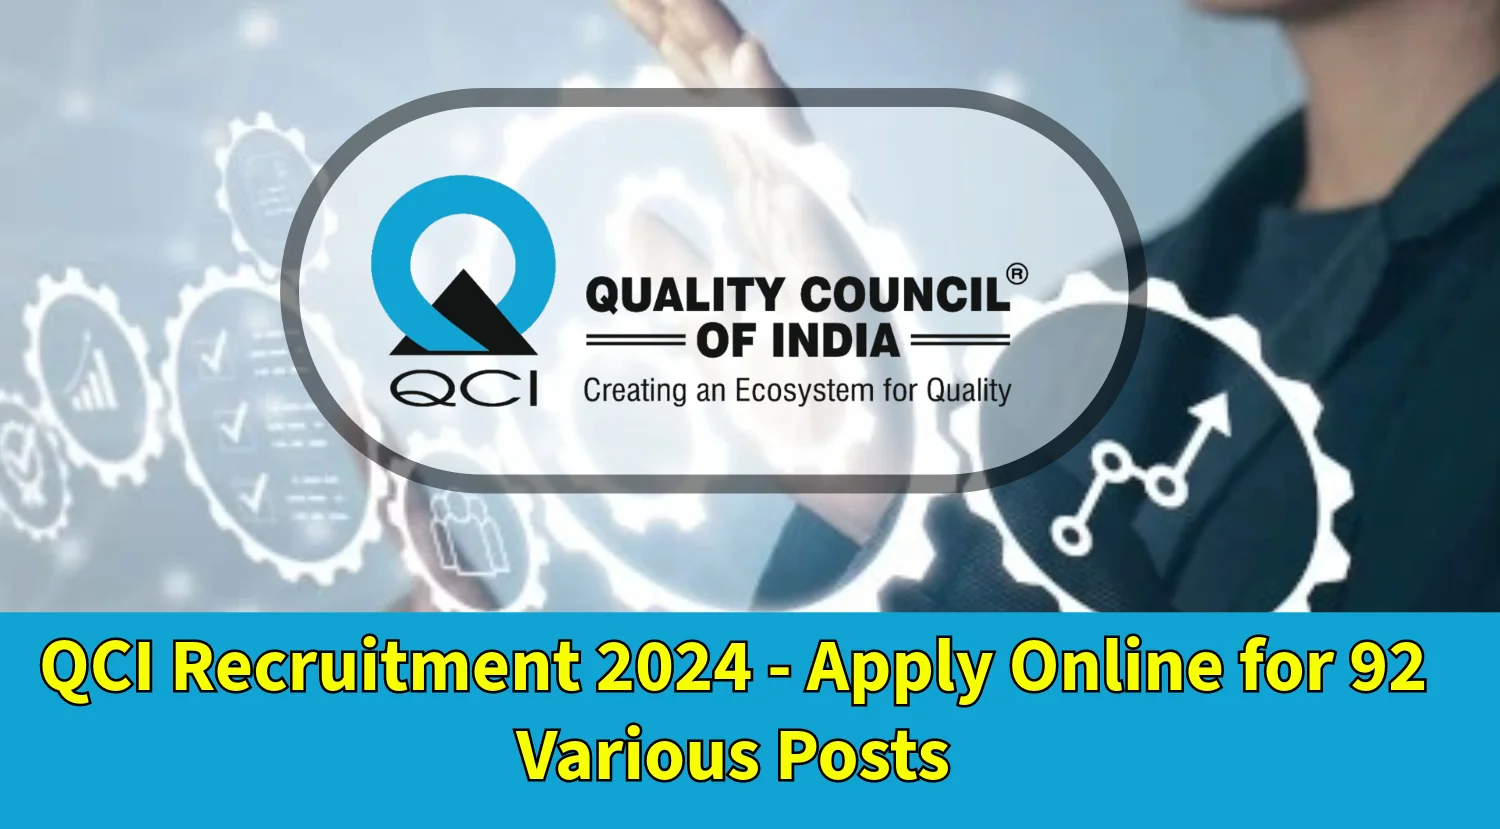 QCI Recruitment 2024 - Apply Online for 92 Various Posts